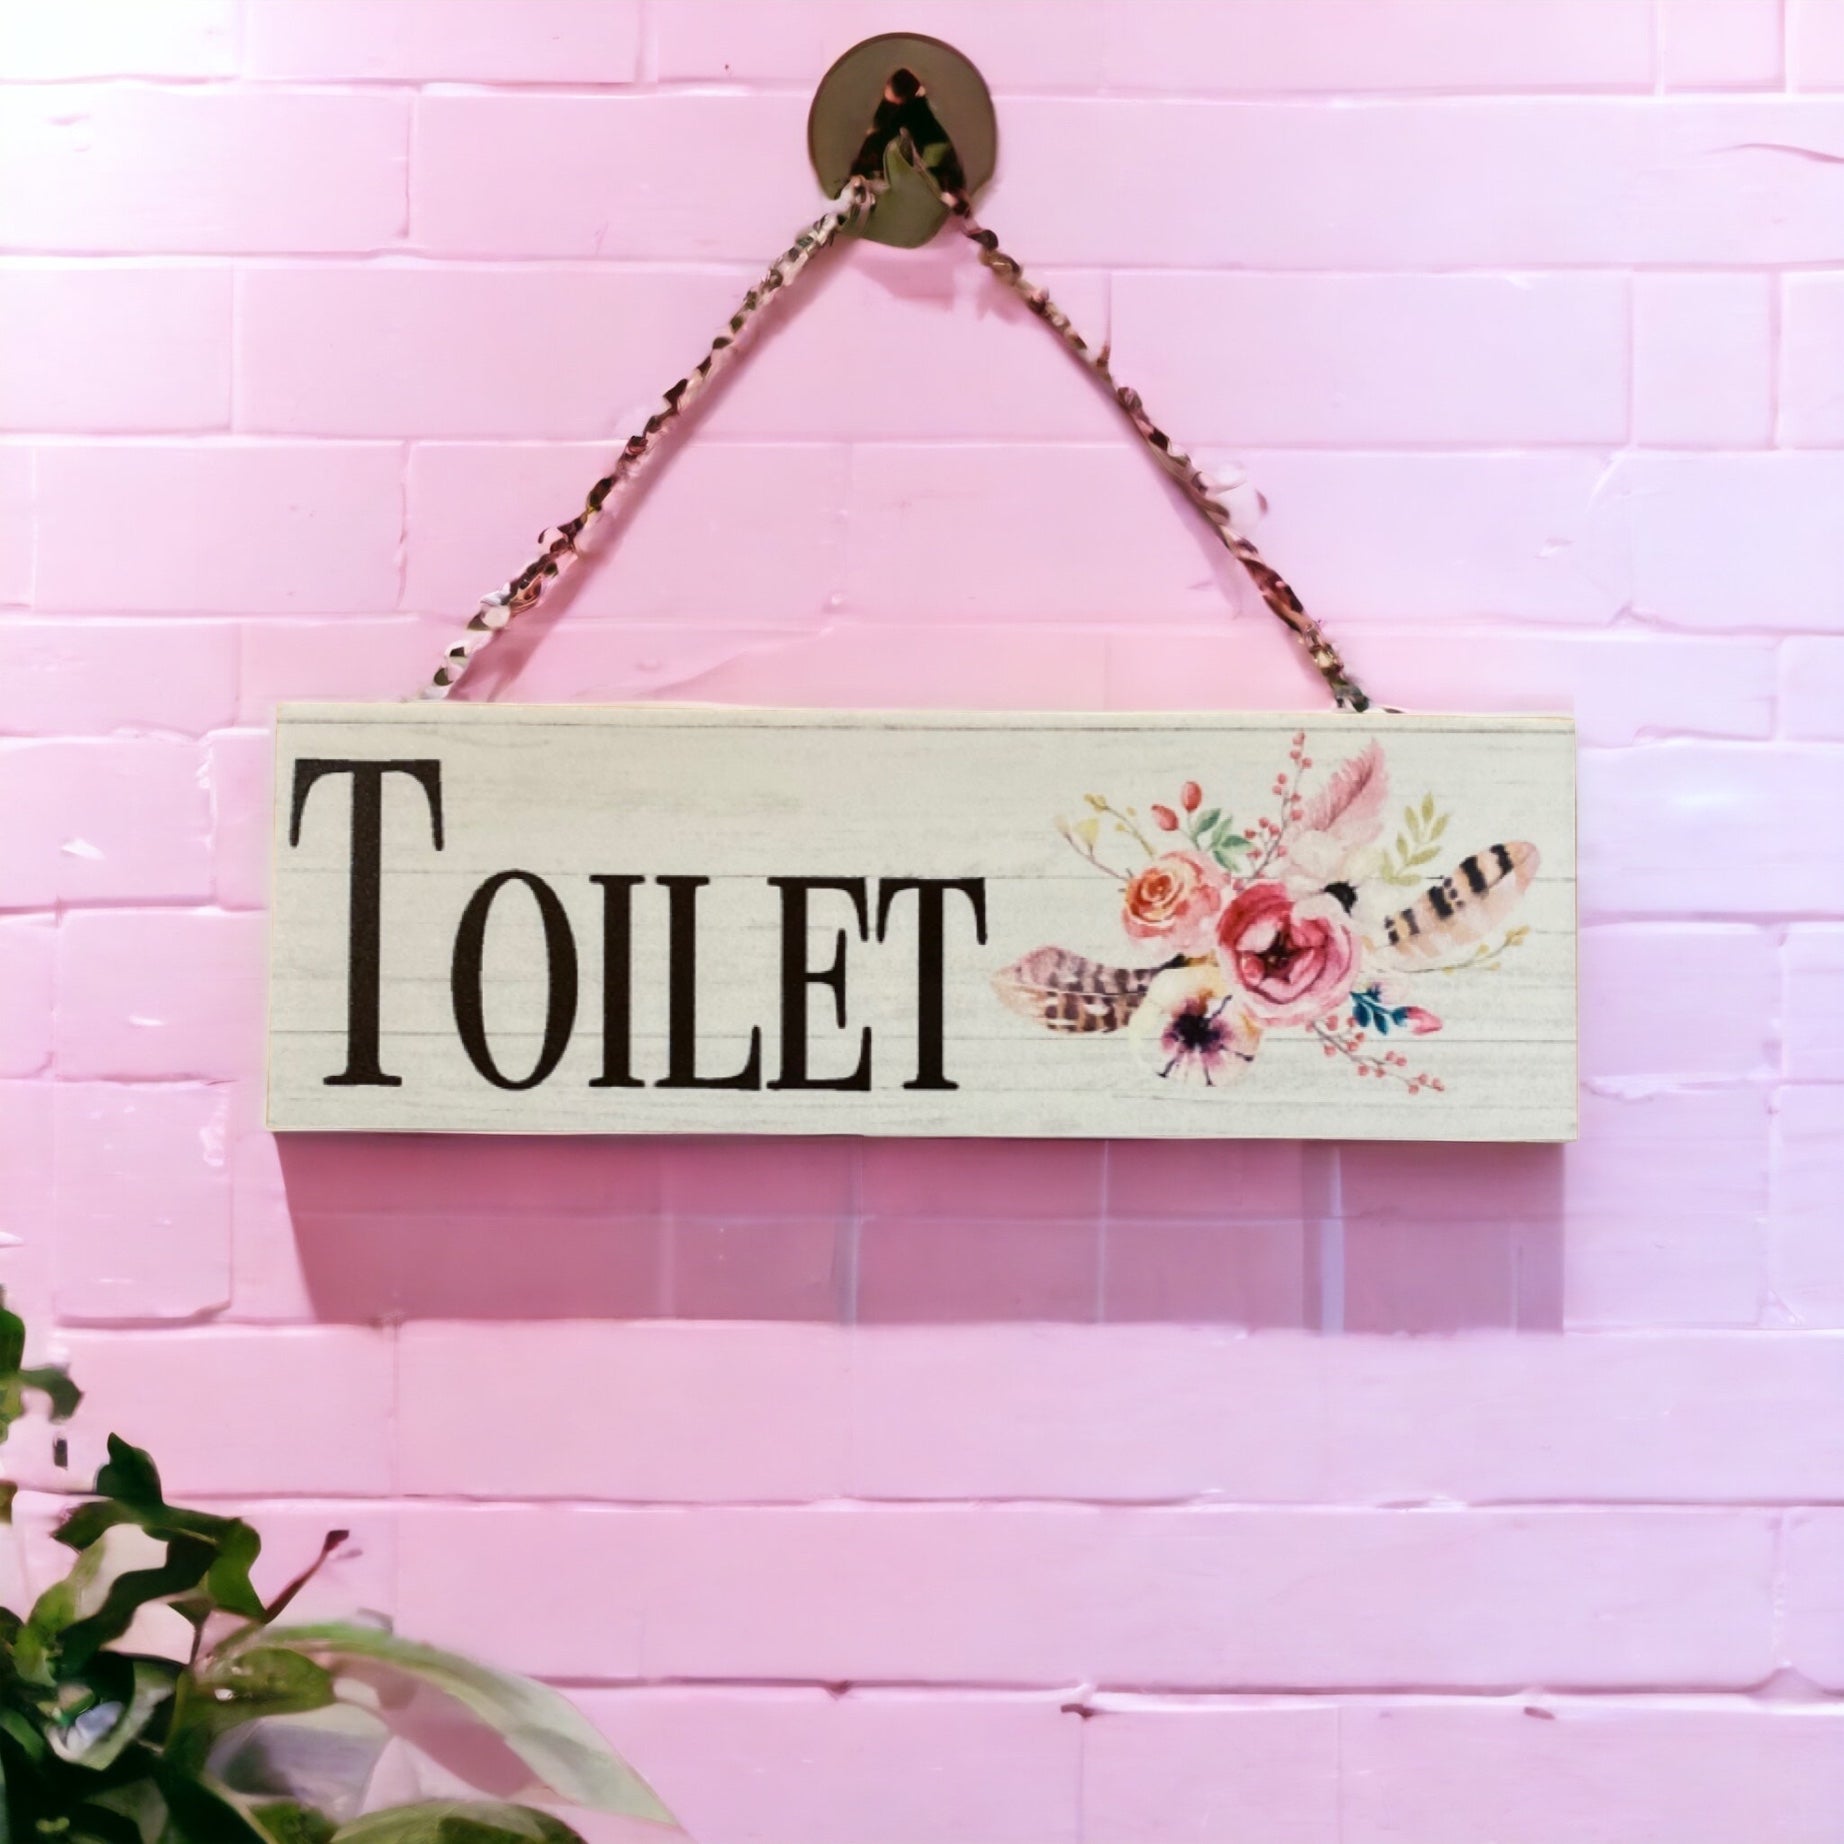 Flowers Feathers Toilet Laundry Bathroom Door Sign - The Renmy Store Homewares & Gifts 